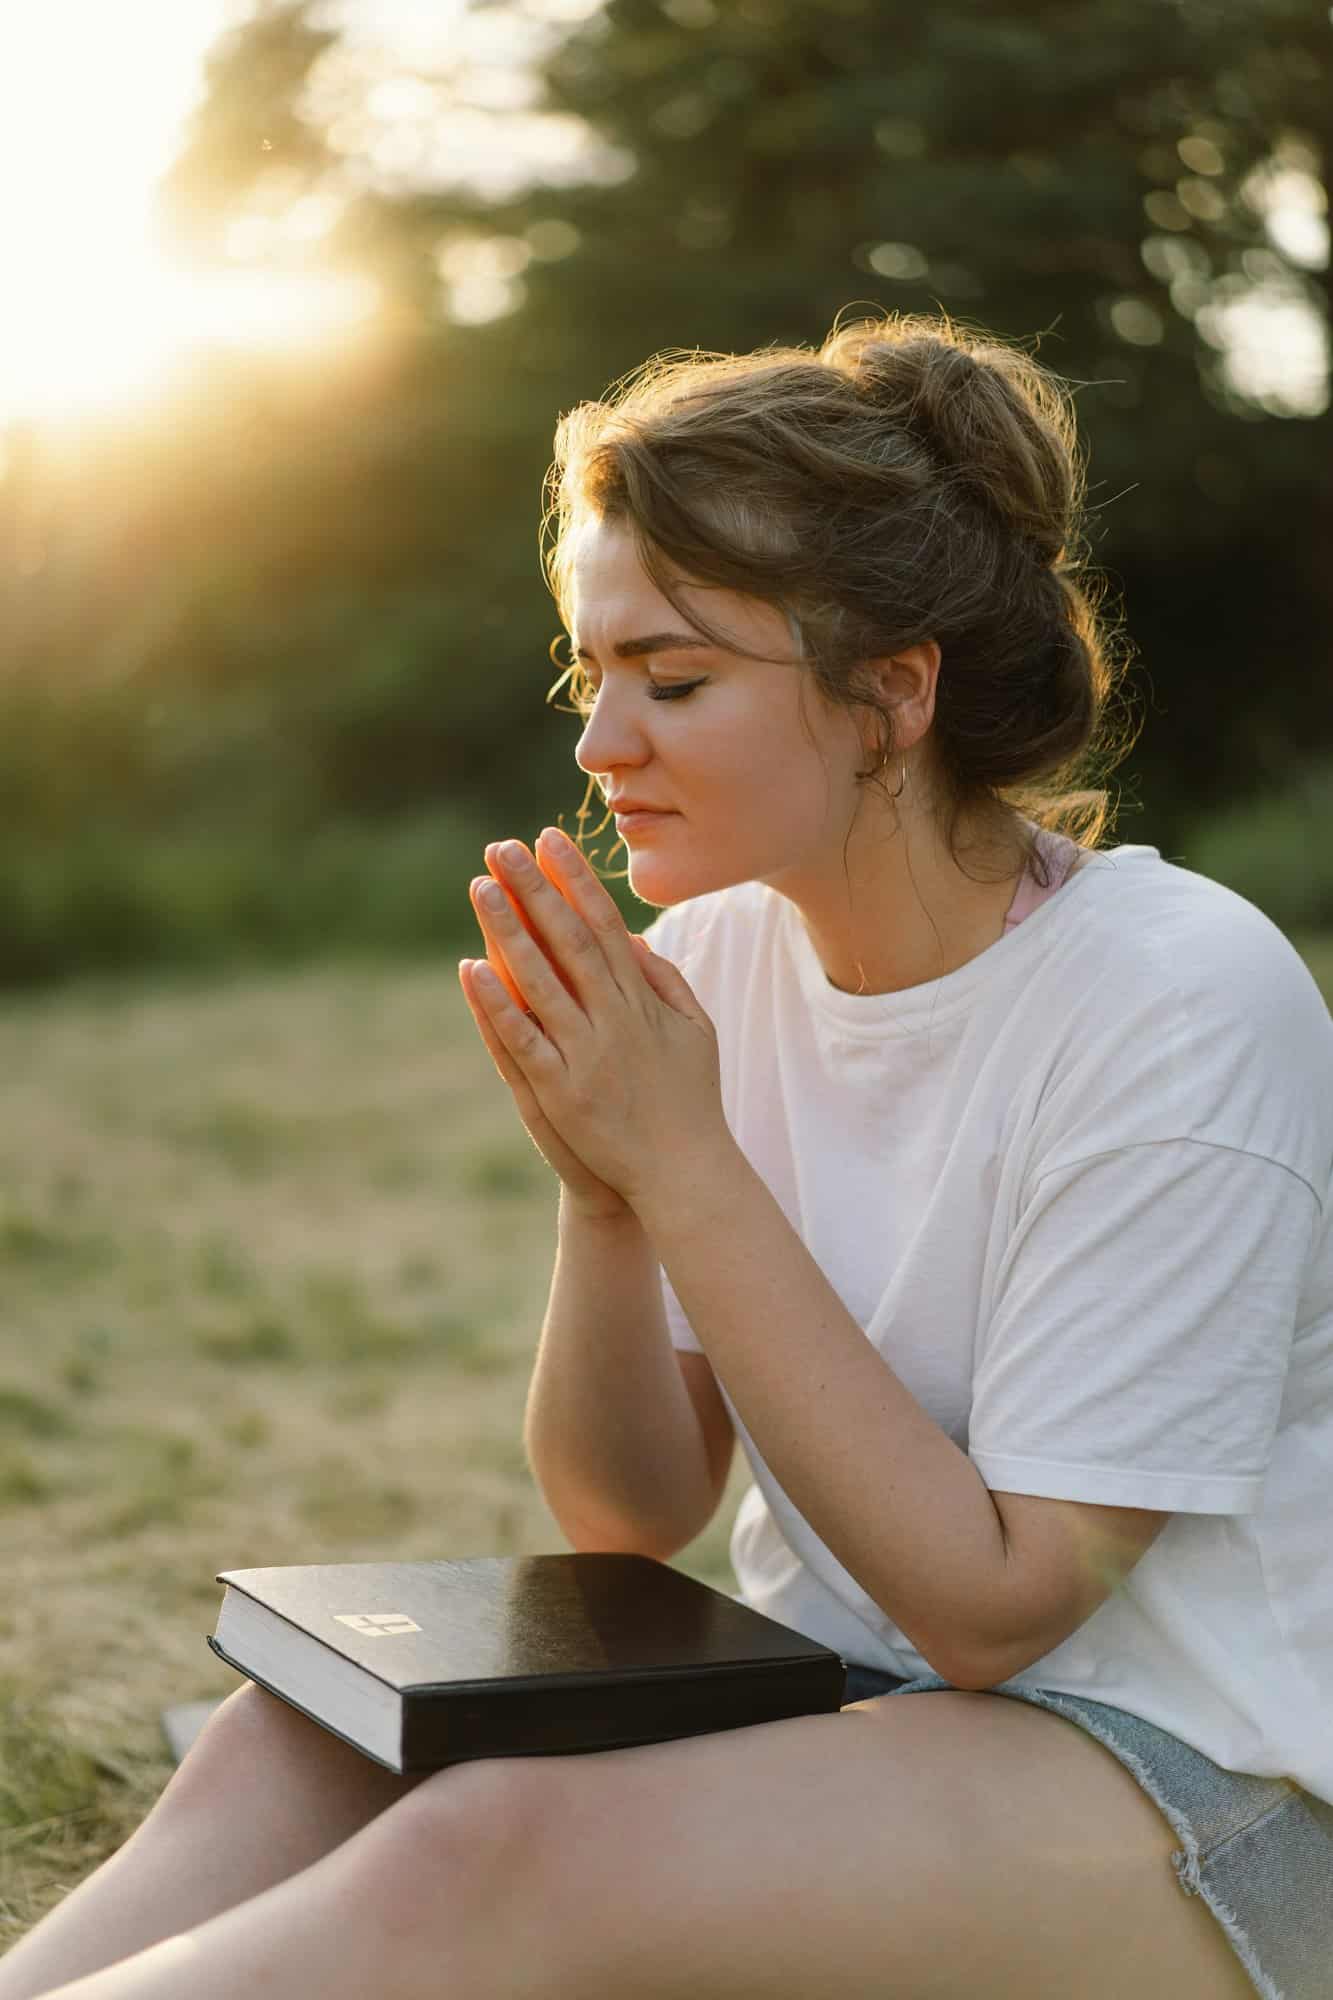 Woman closed her eyes, praying in a field during beautiful sunset.